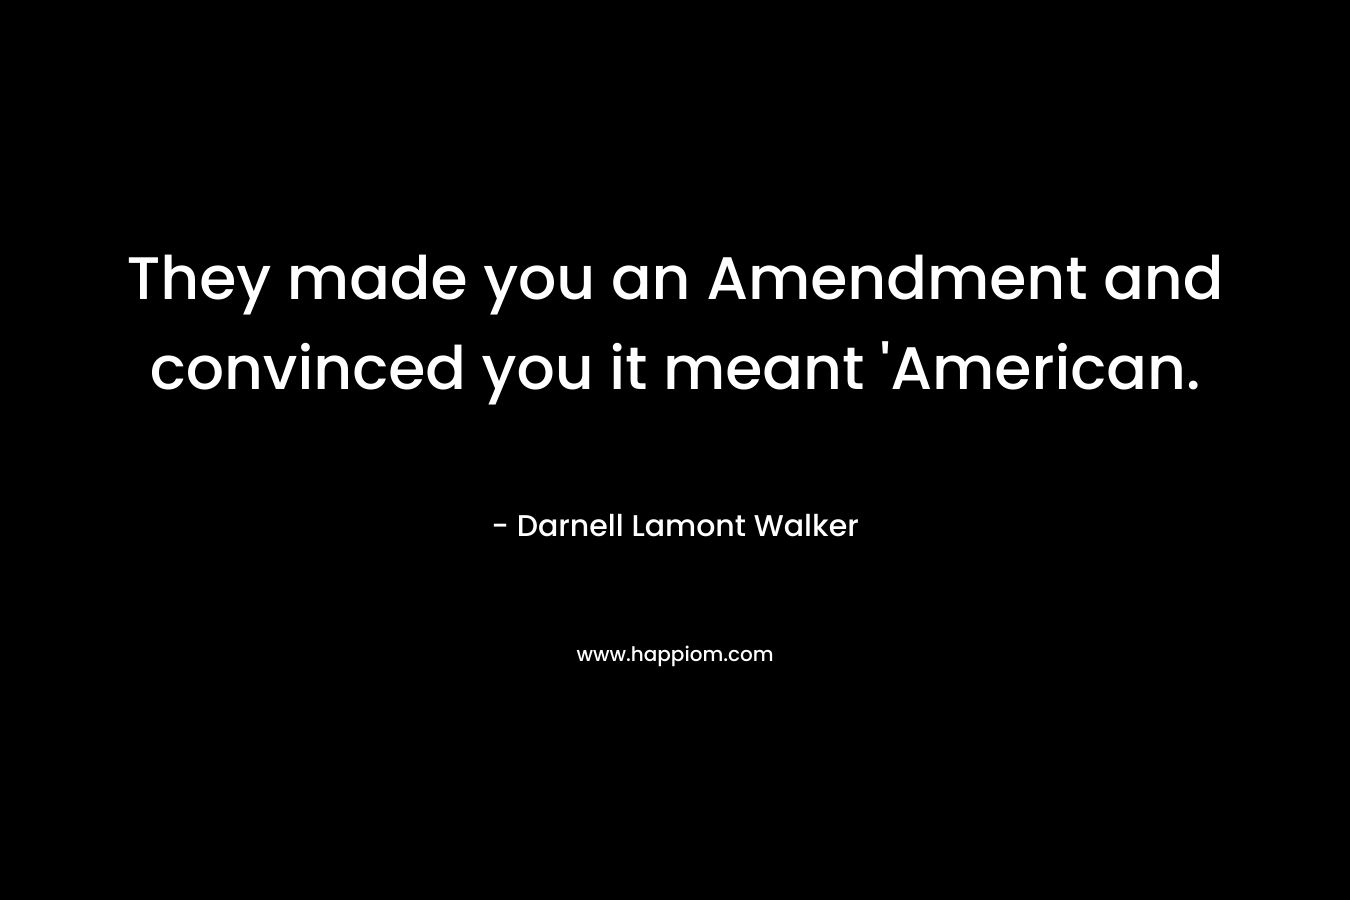 They made you an Amendment and convinced you it meant 'American.